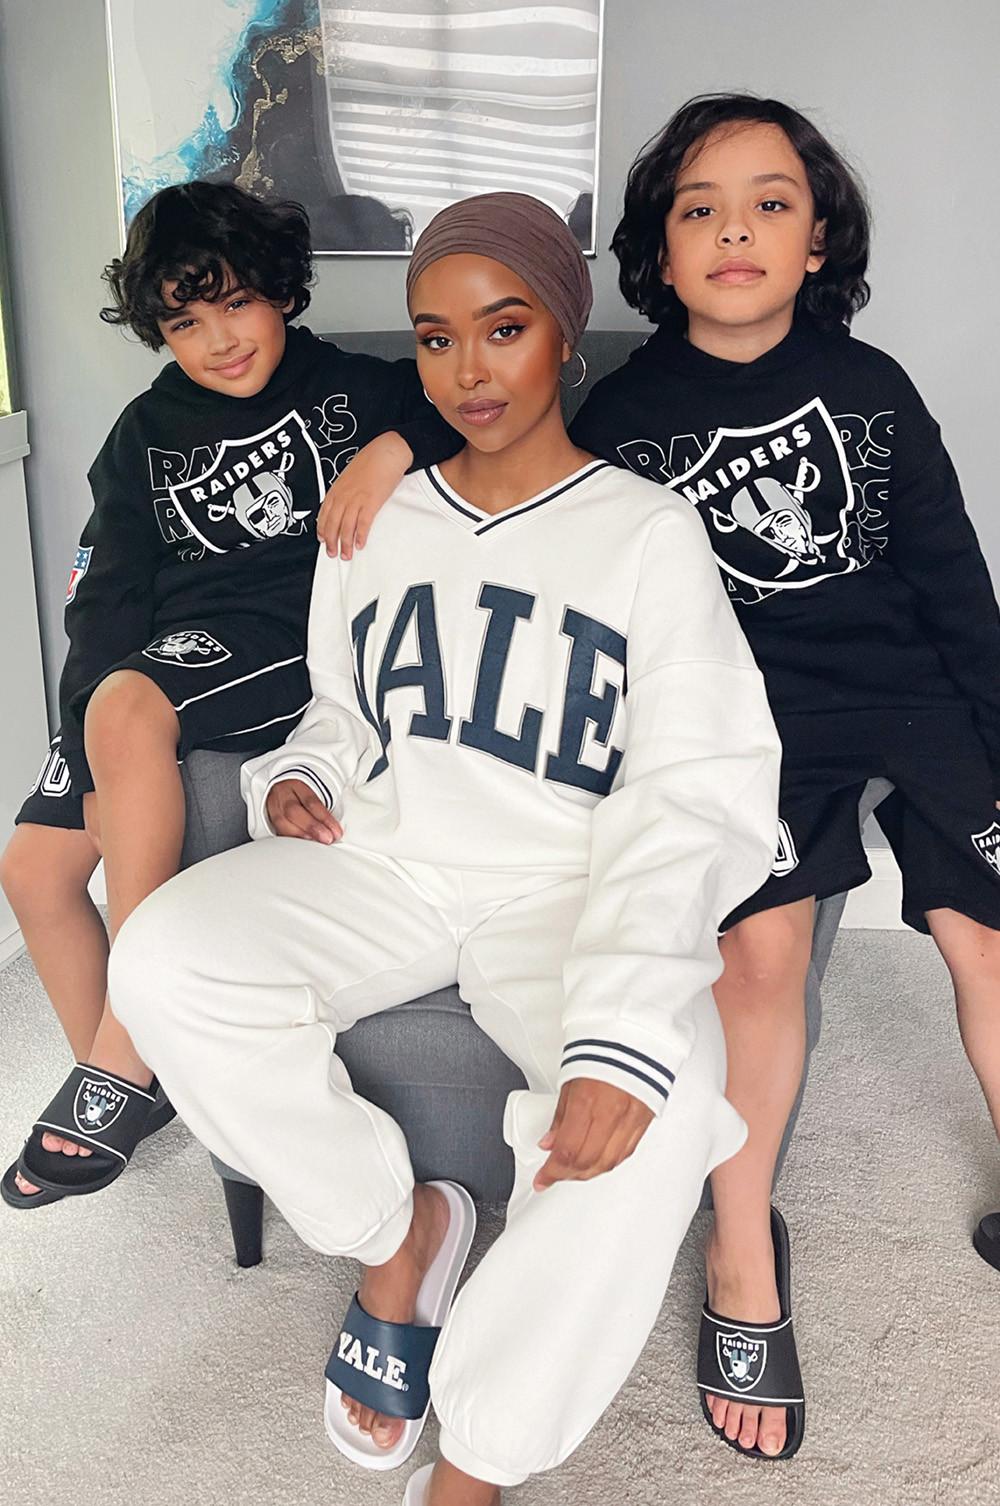 Mother wears white Yale tracksuit, while kids wear navy Raiders sweatshirt and shorts